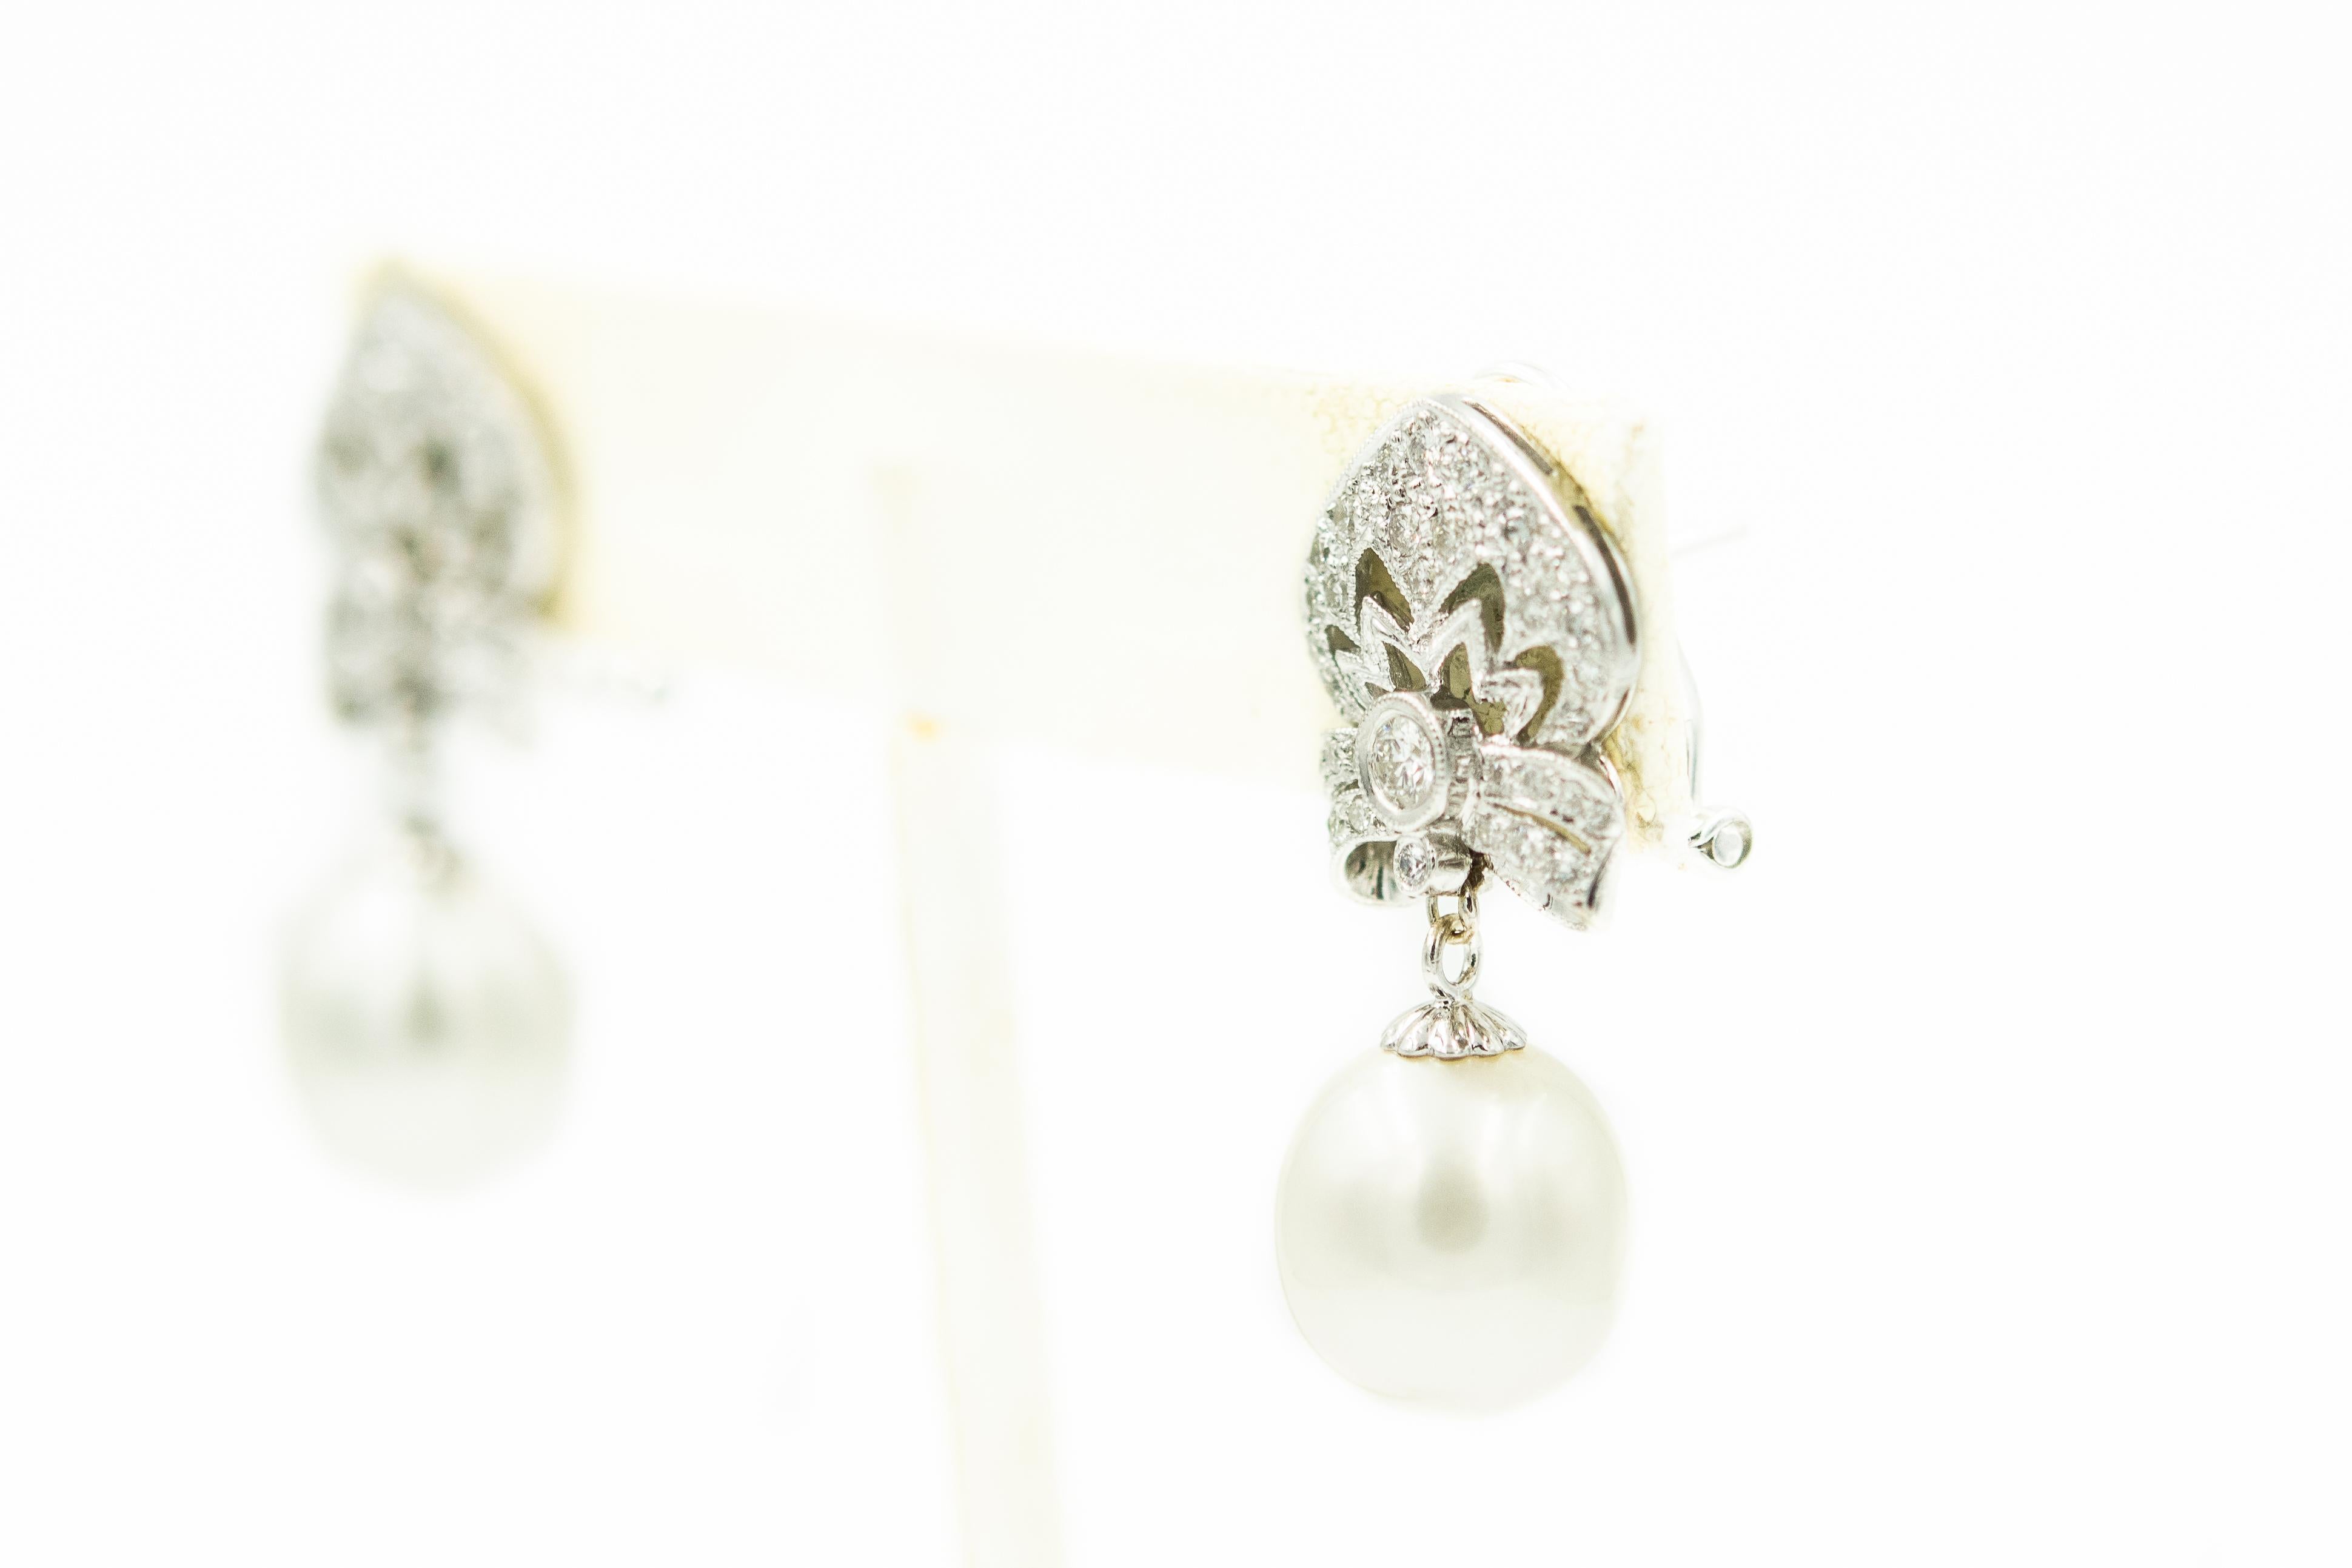 Beautiful 18k white gold dangle earrings featuring a 12mm silvery white cultured pearl drop originating from a diamond top shield motif section. They have omega post backs. Marked 750 MC The approximate total diamond weight is .74 carats.